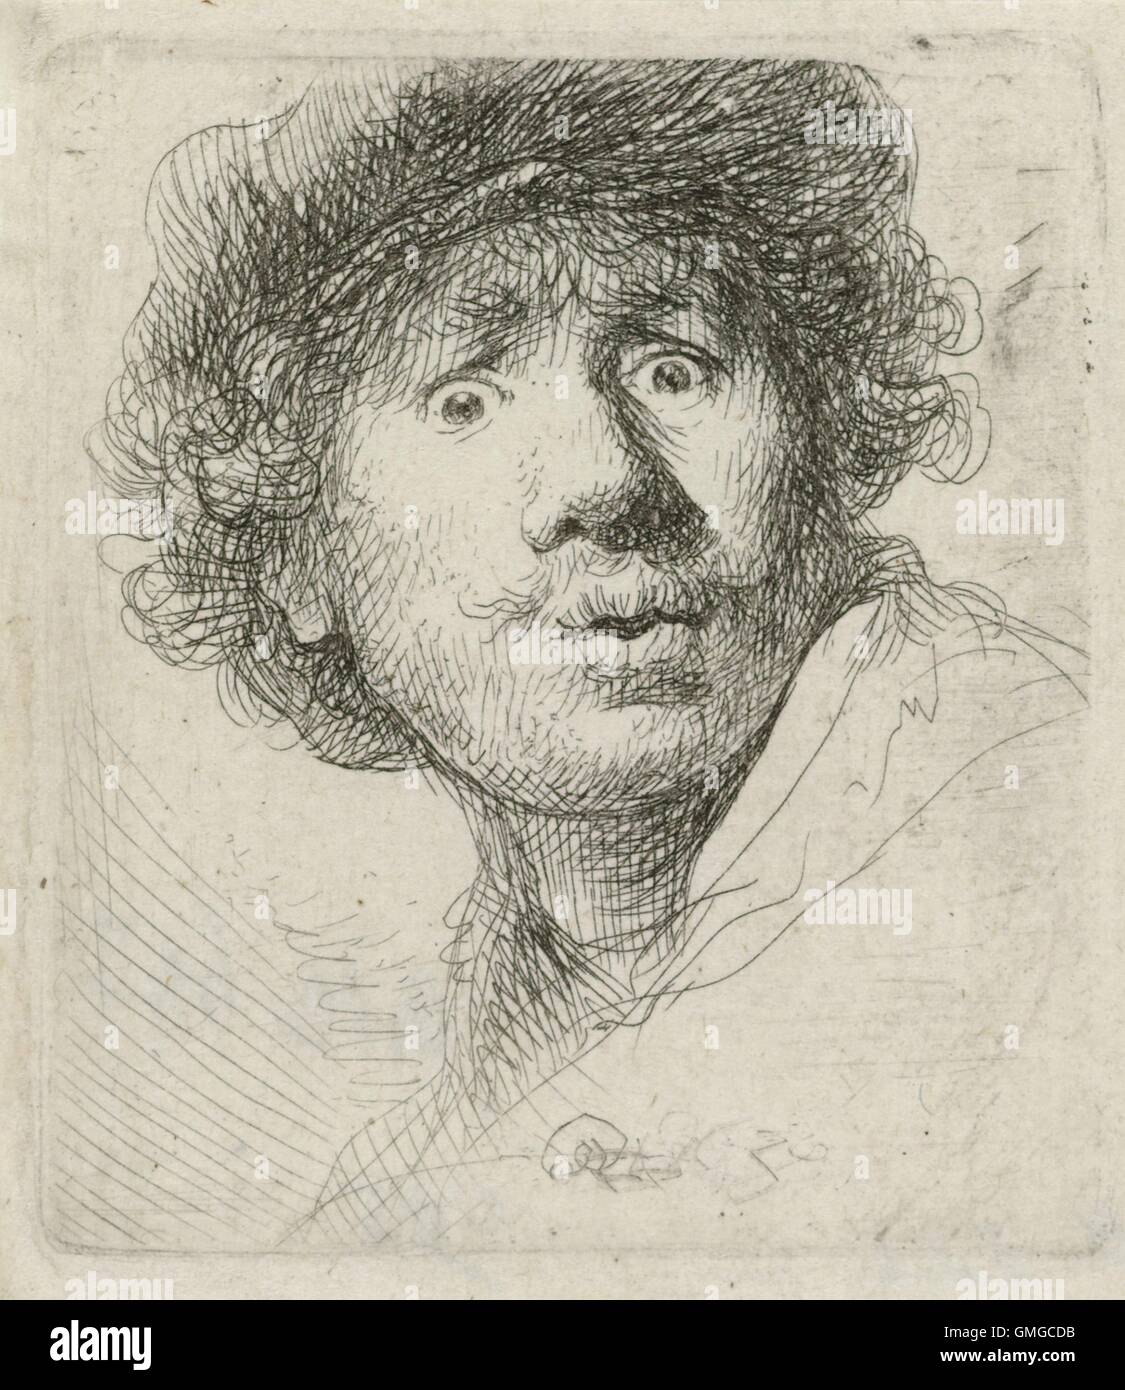 Self-Portrait with Beret, by Rembrandt van Rijn, 1630, Dutch print, etching on paper. Rembrandt was 24 when he created this etching (BSLOC 2016 3 25) Stock Photo